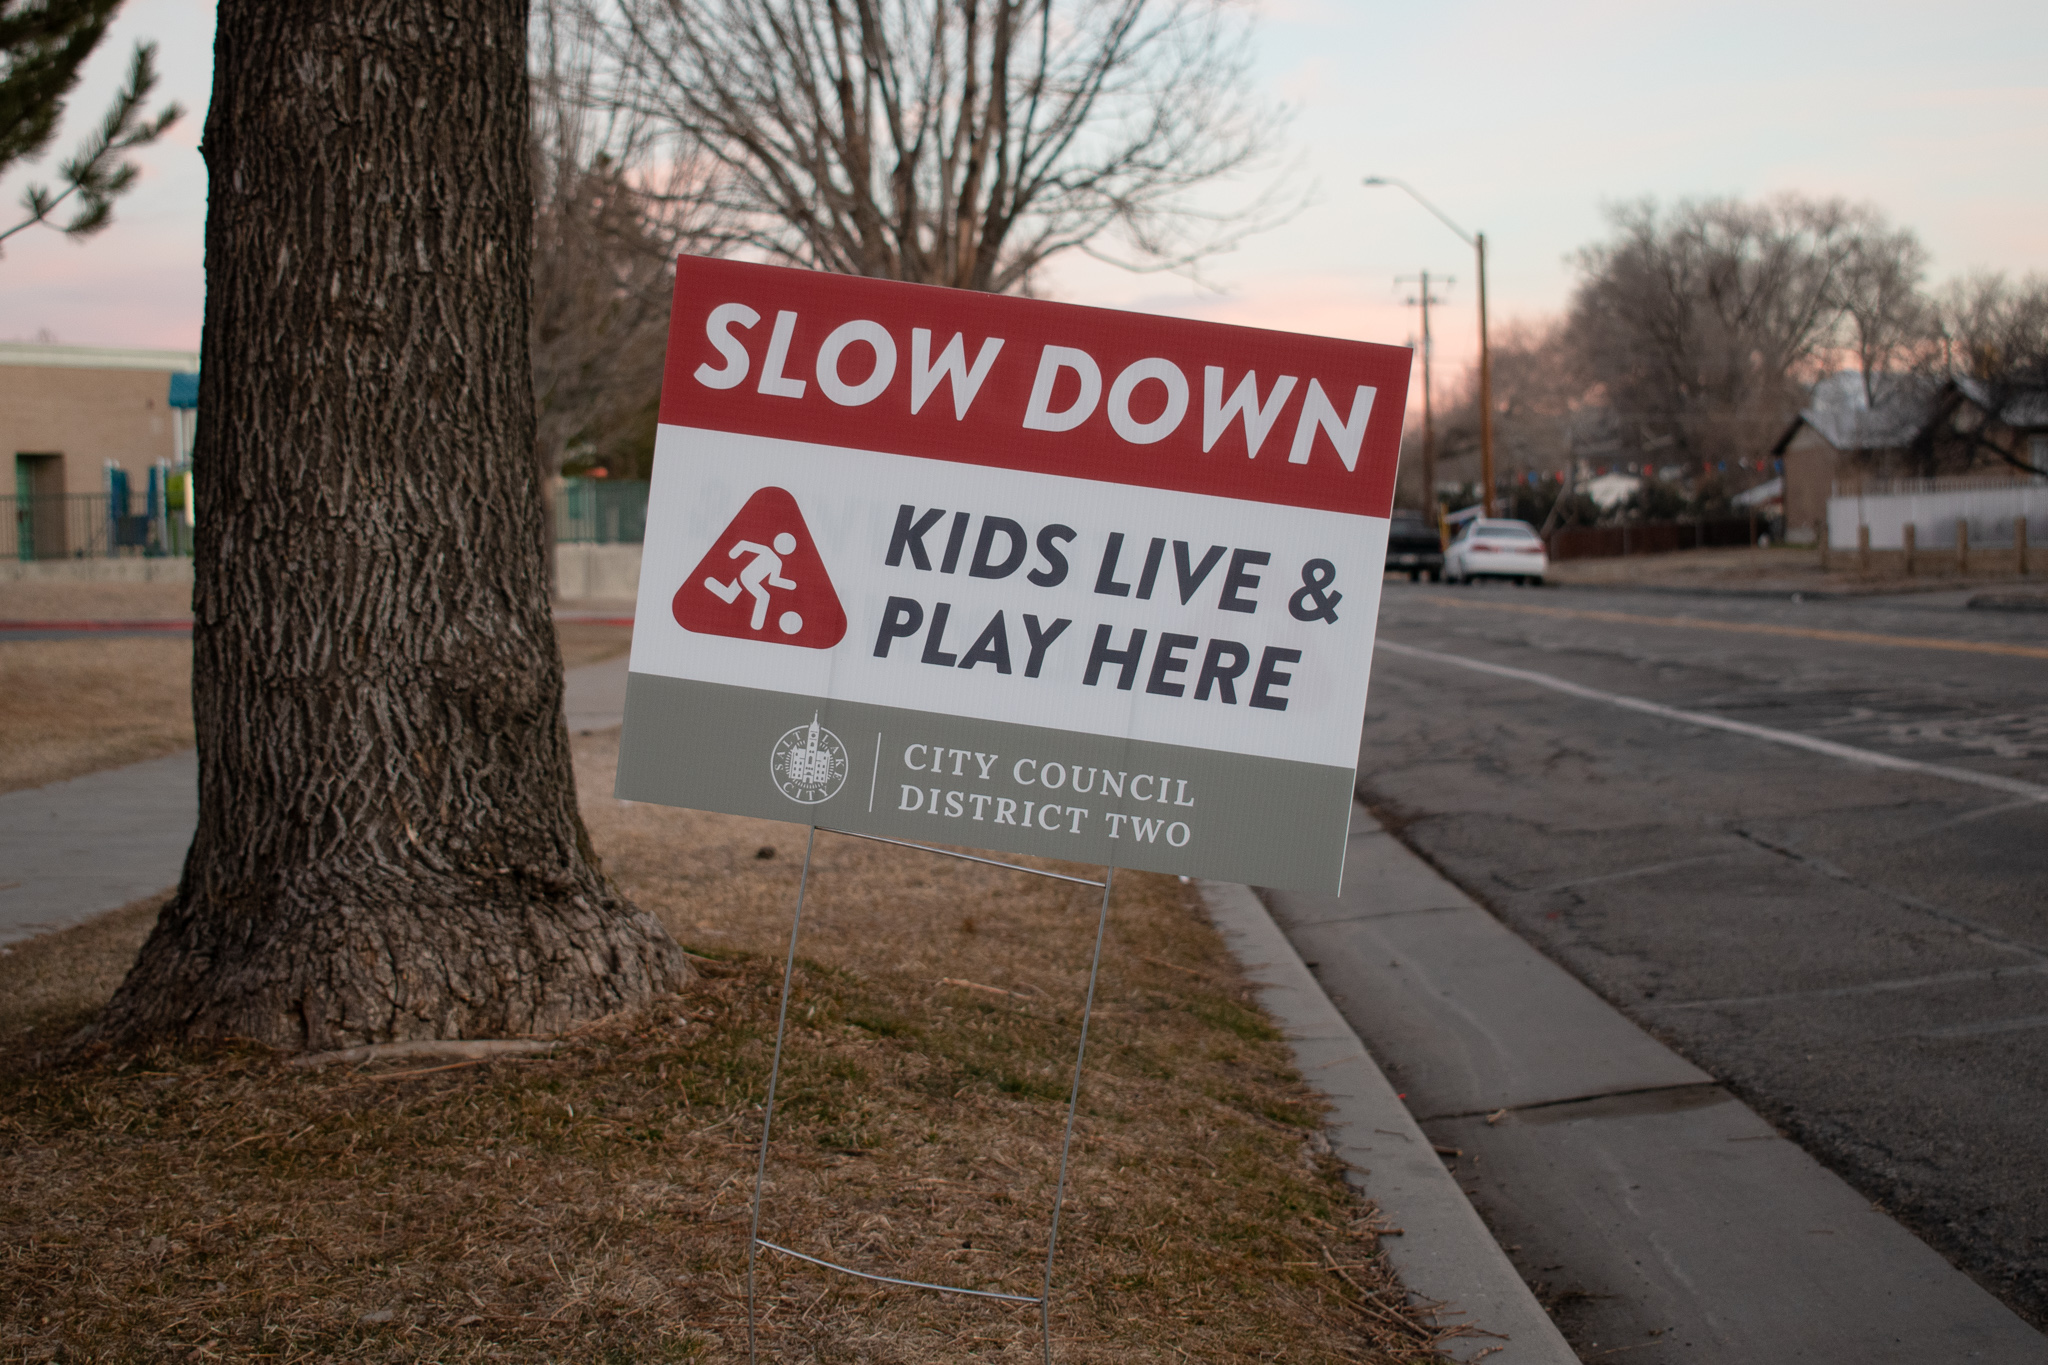 The traffic calming sign reads "Slow down. Kids live and play here. City Council District Two."